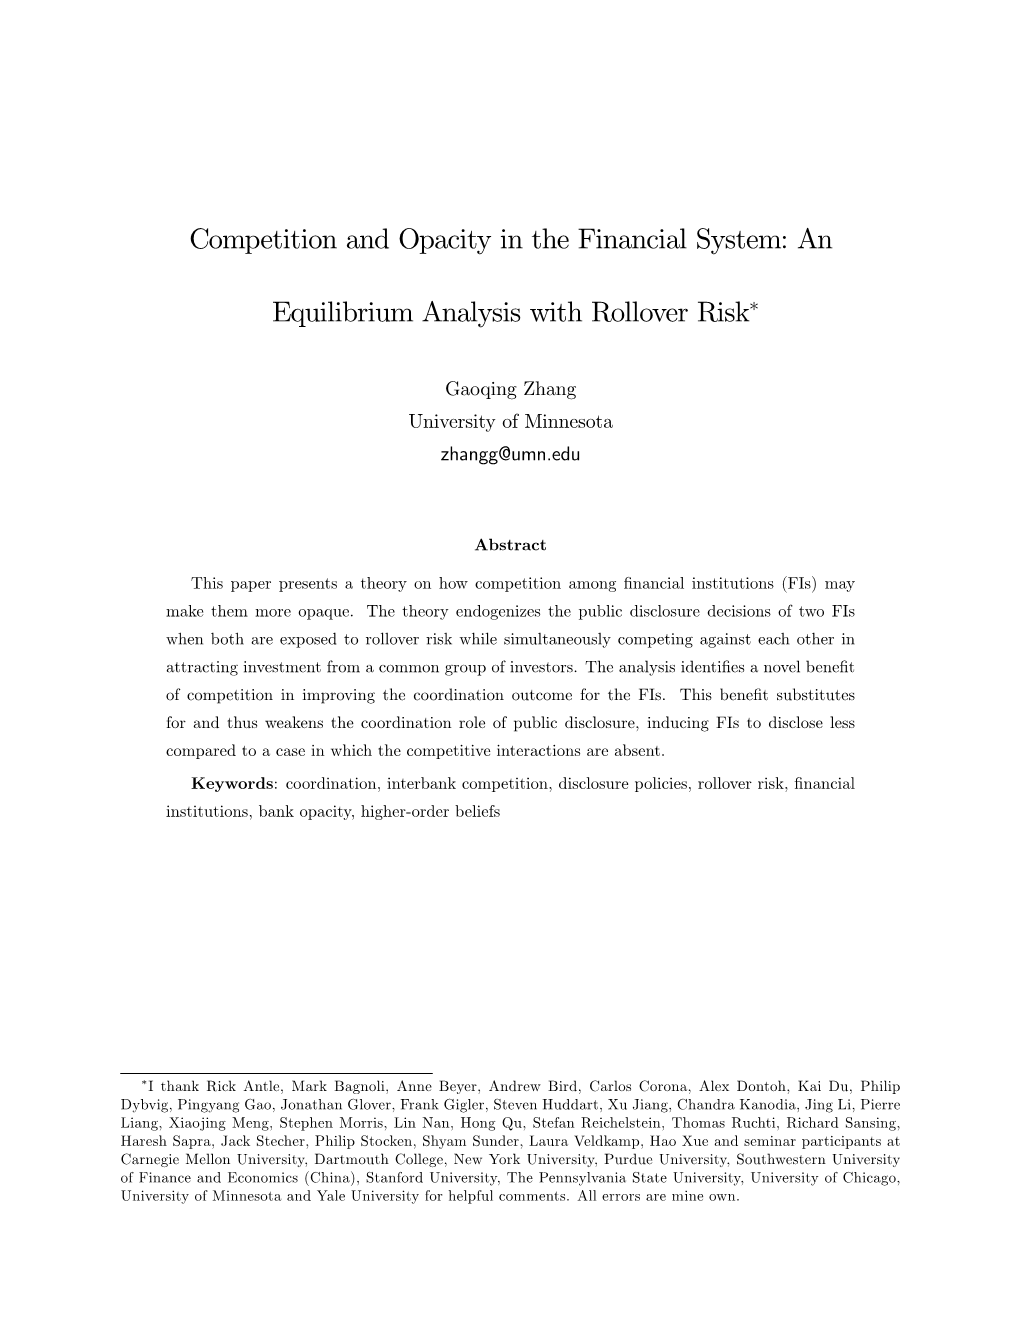 Competition and Opacity in the Financial System: an Equilibrium Analysis with Rollover Risk